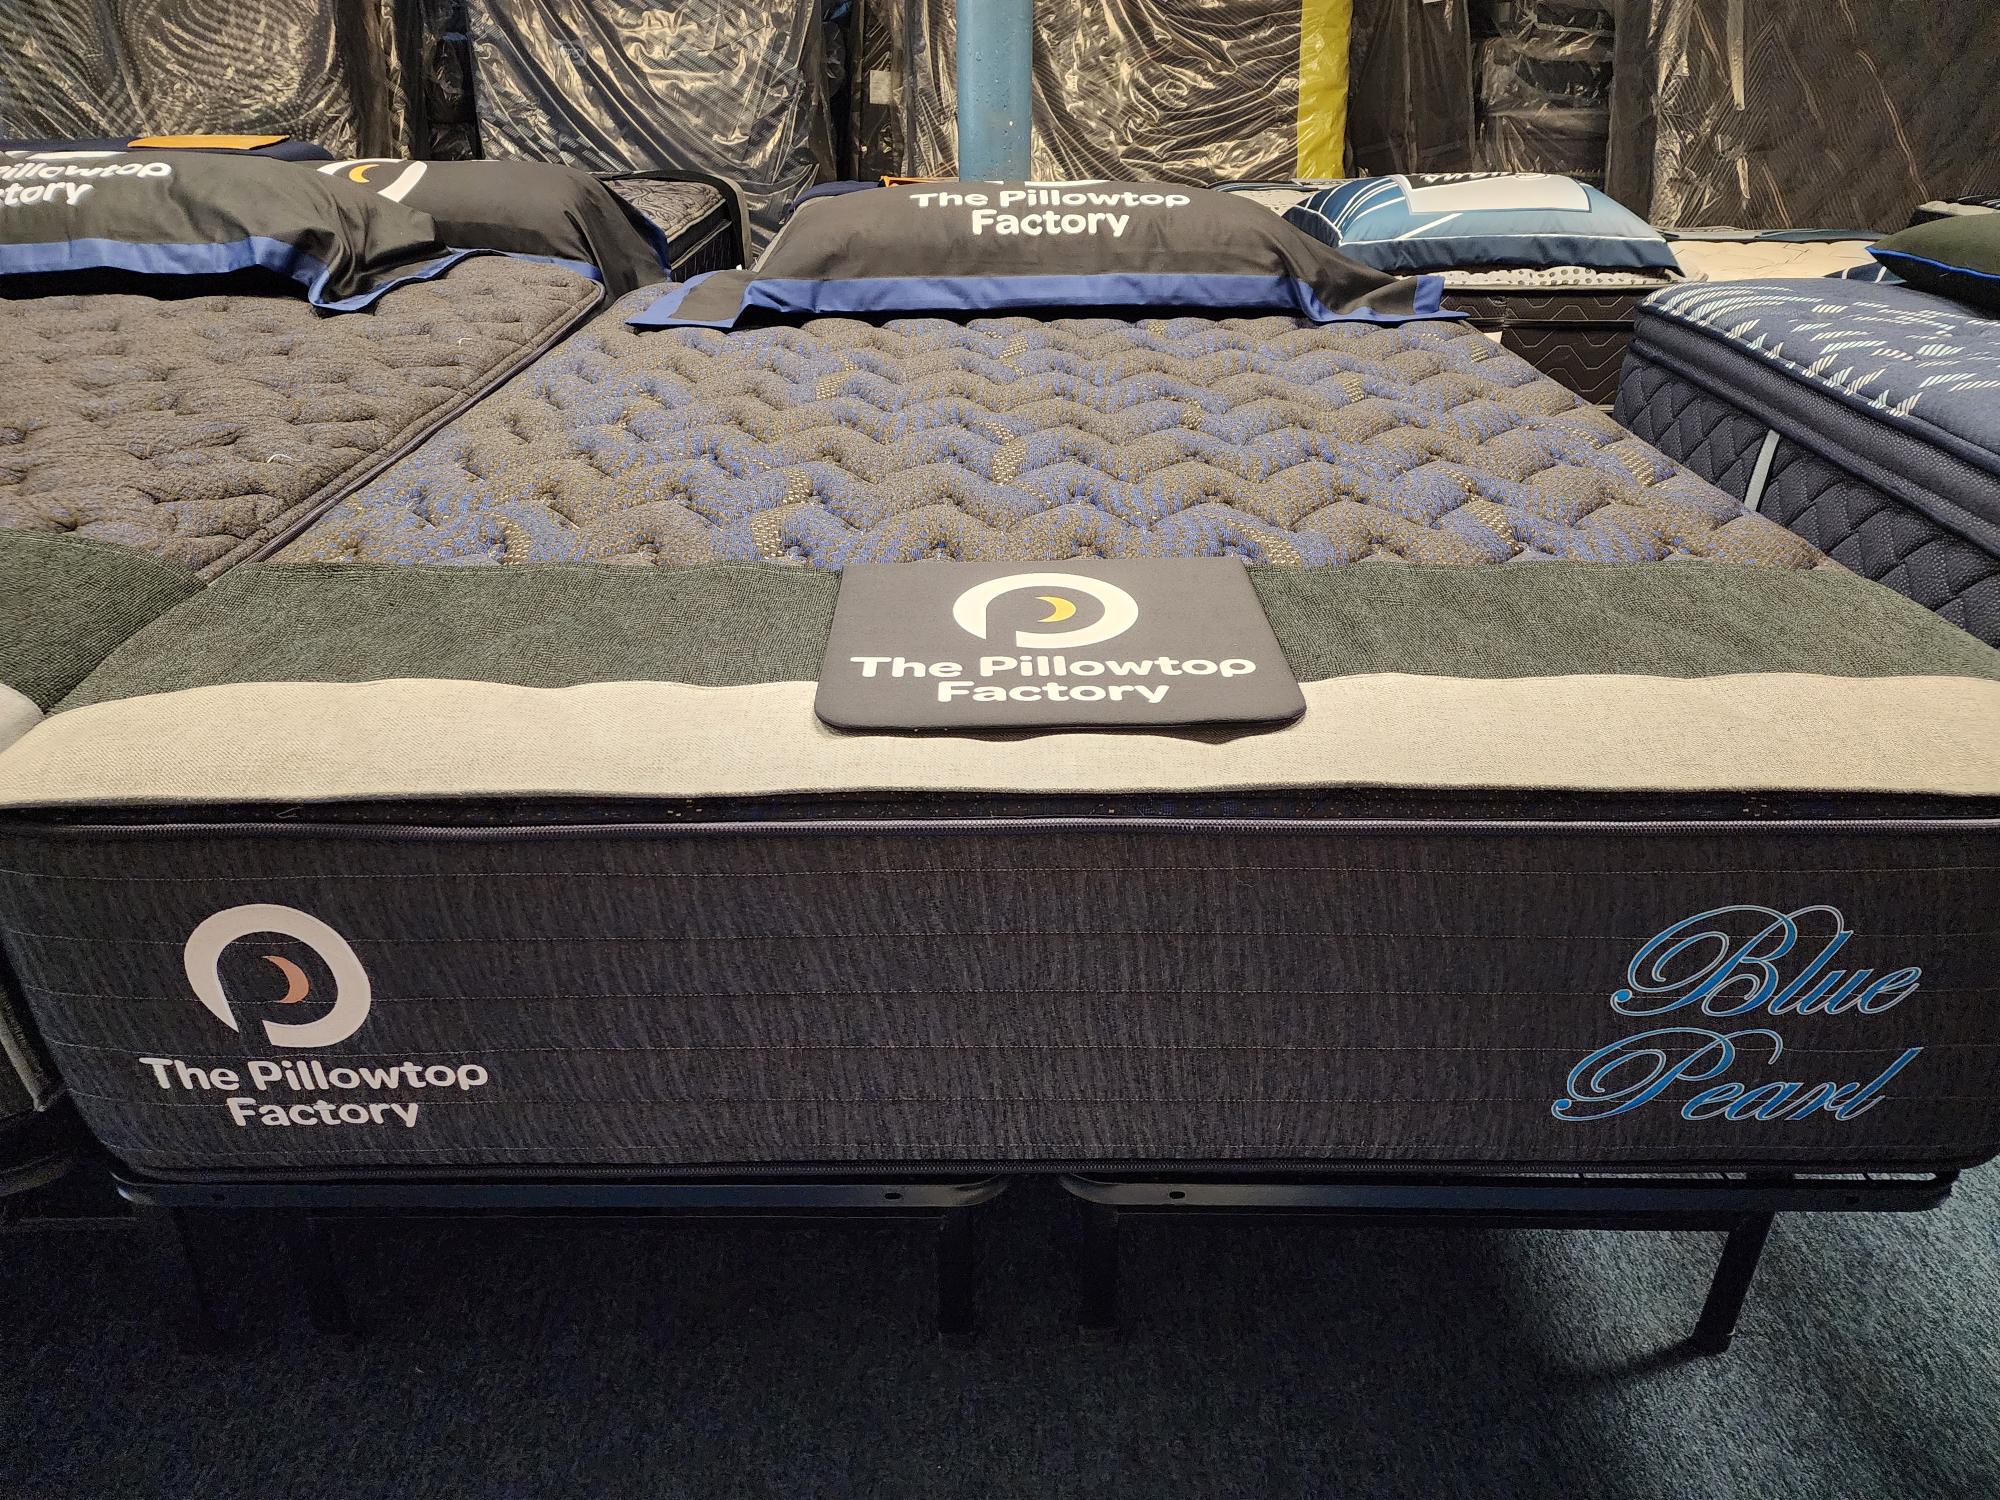 Blue pearl mattress for sale